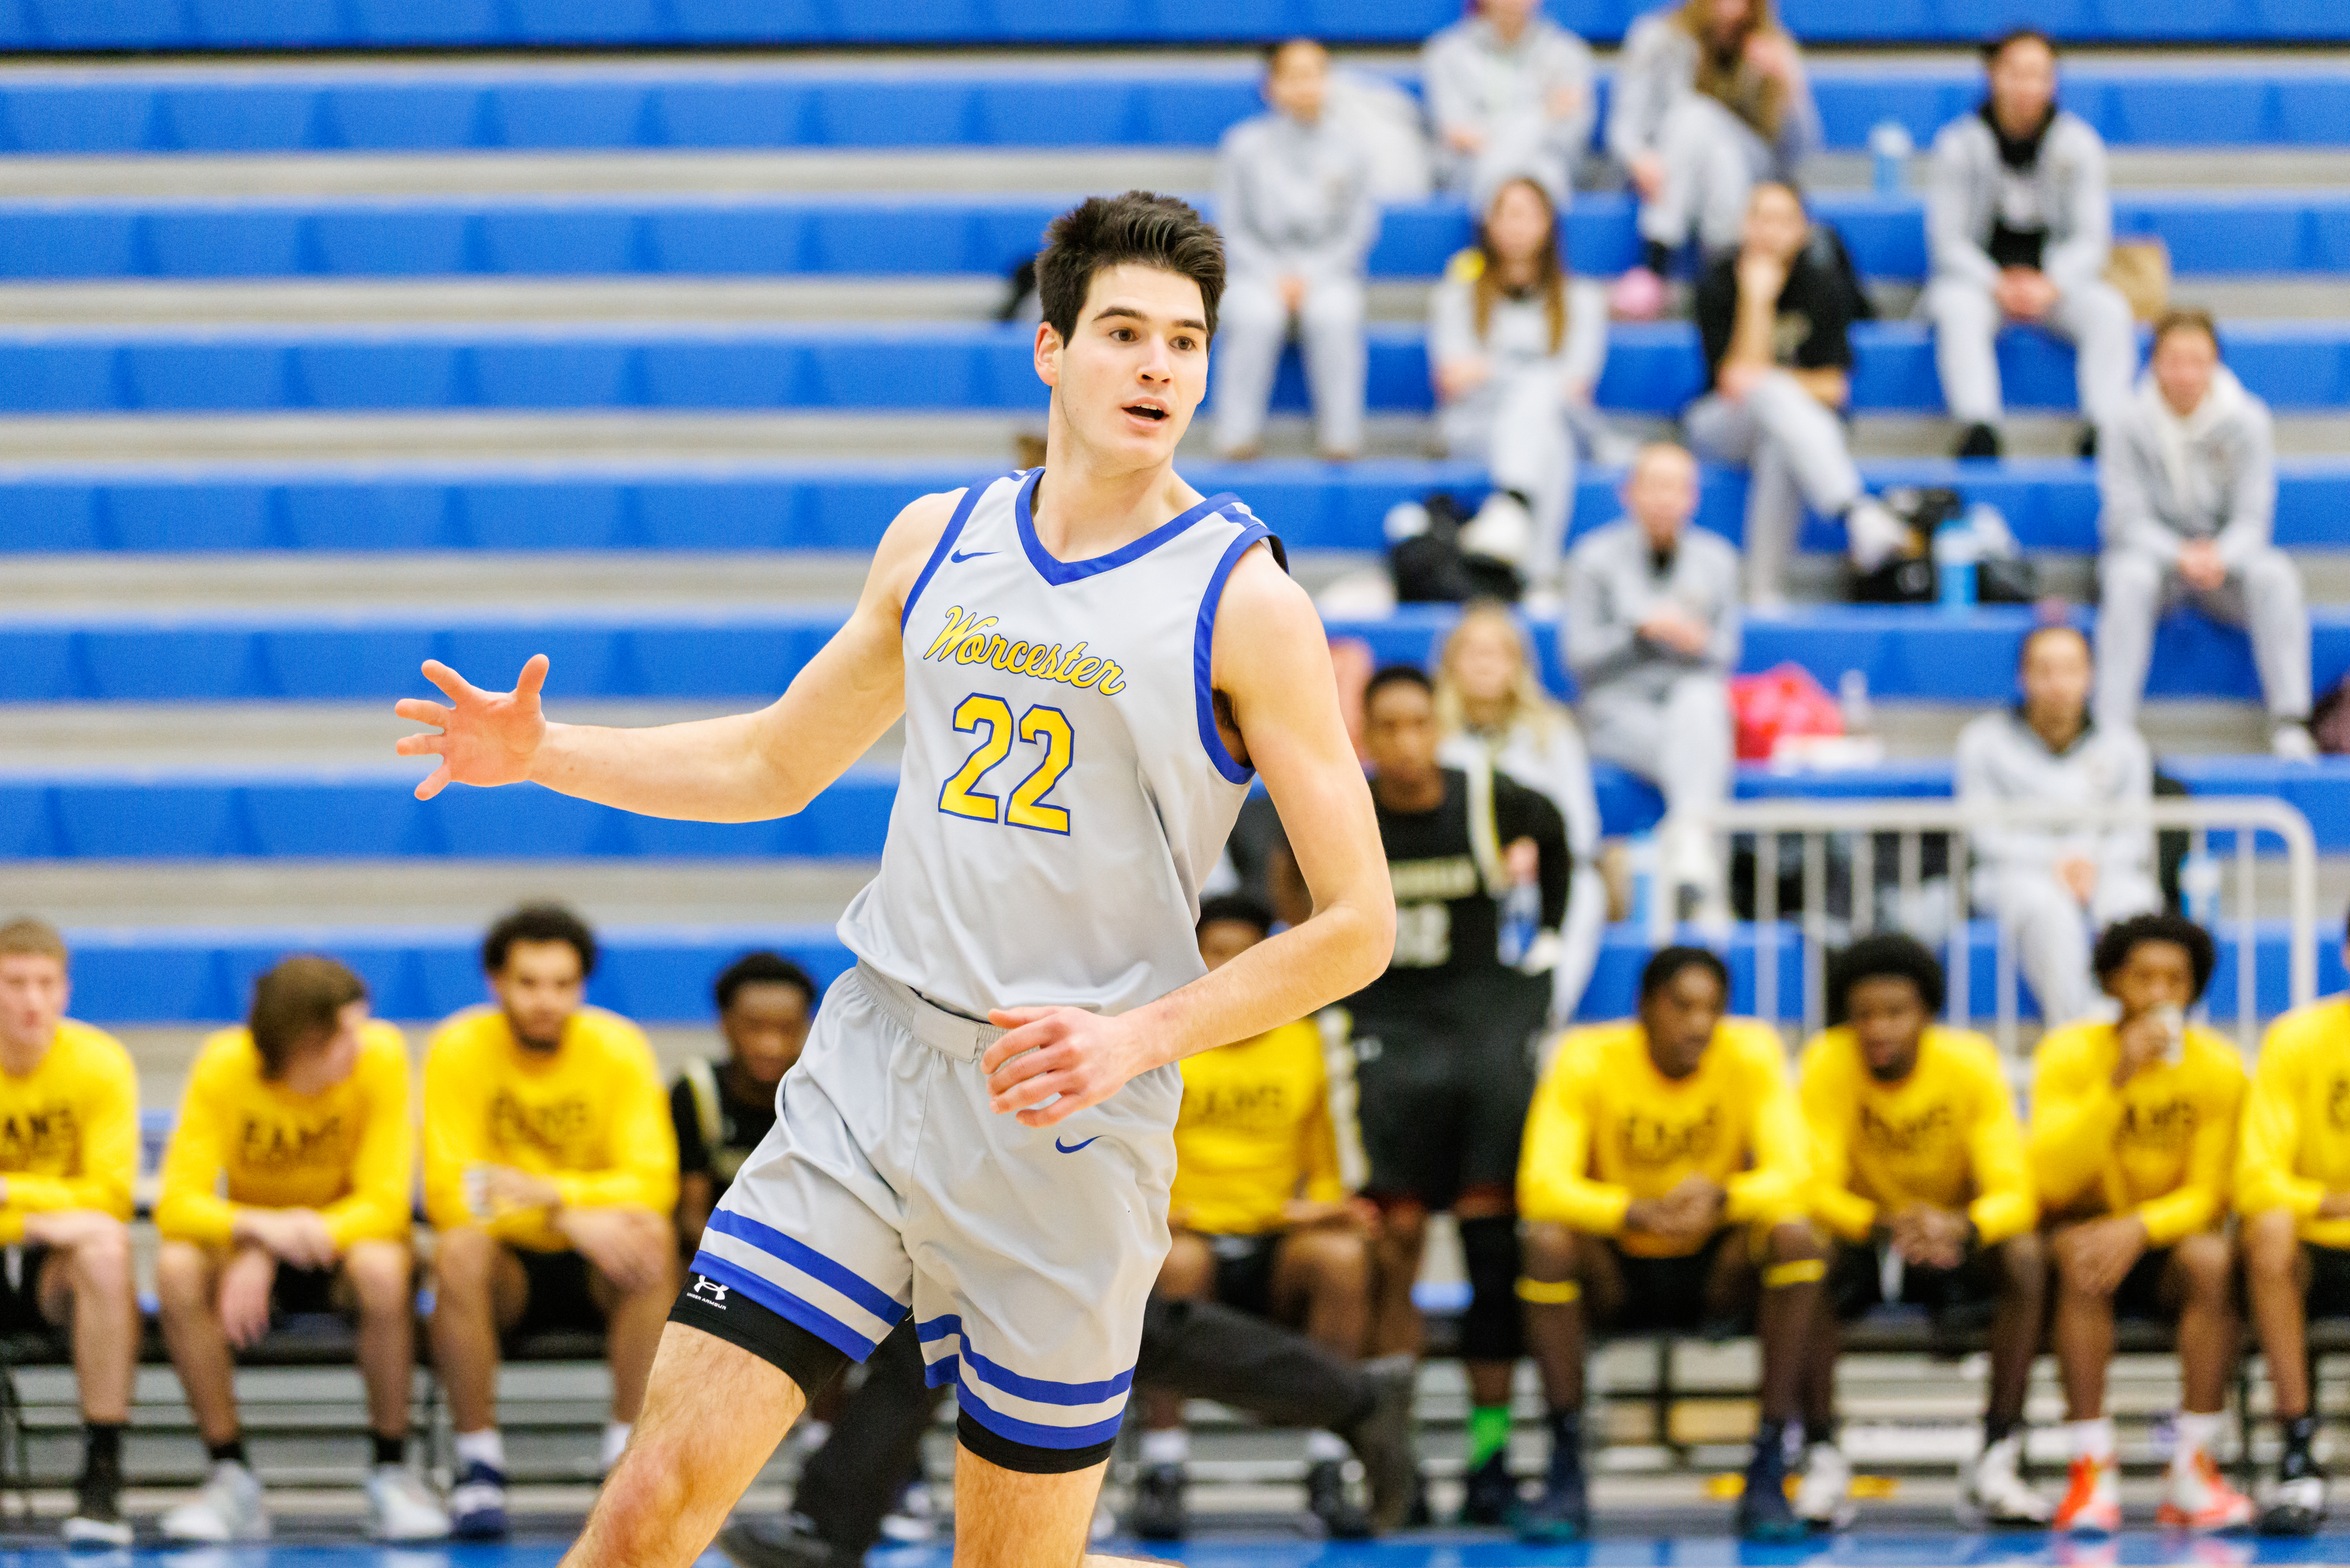 Worcester State Men’s Basketball Remain Unbeaten in MASCAC Play as the Advance to Third Straight MASCAC Championship